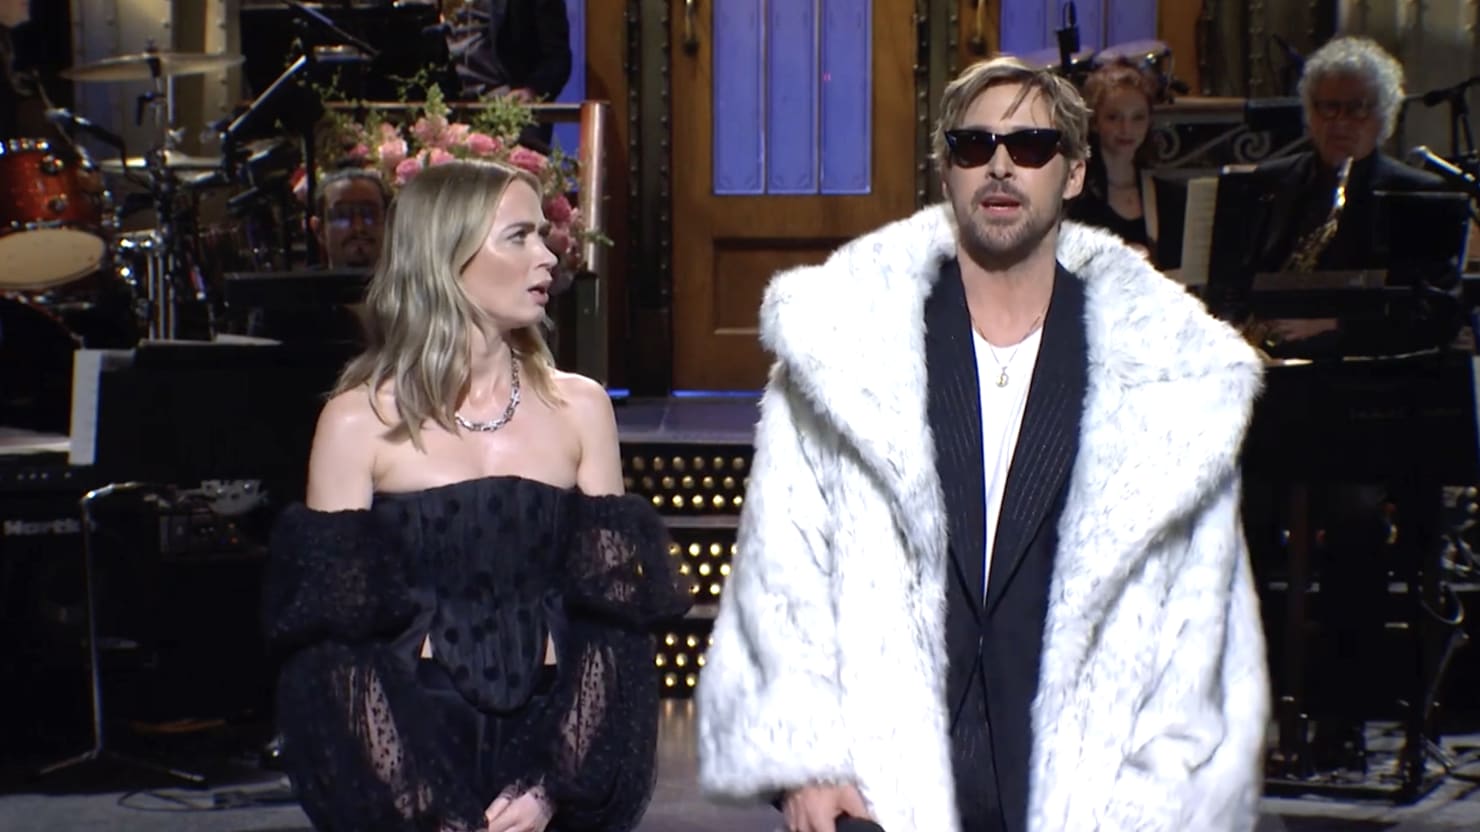 Saturday Night Live Takes a Two-Week Break, Ryan Gosling Steals the Show with Surprise Guests